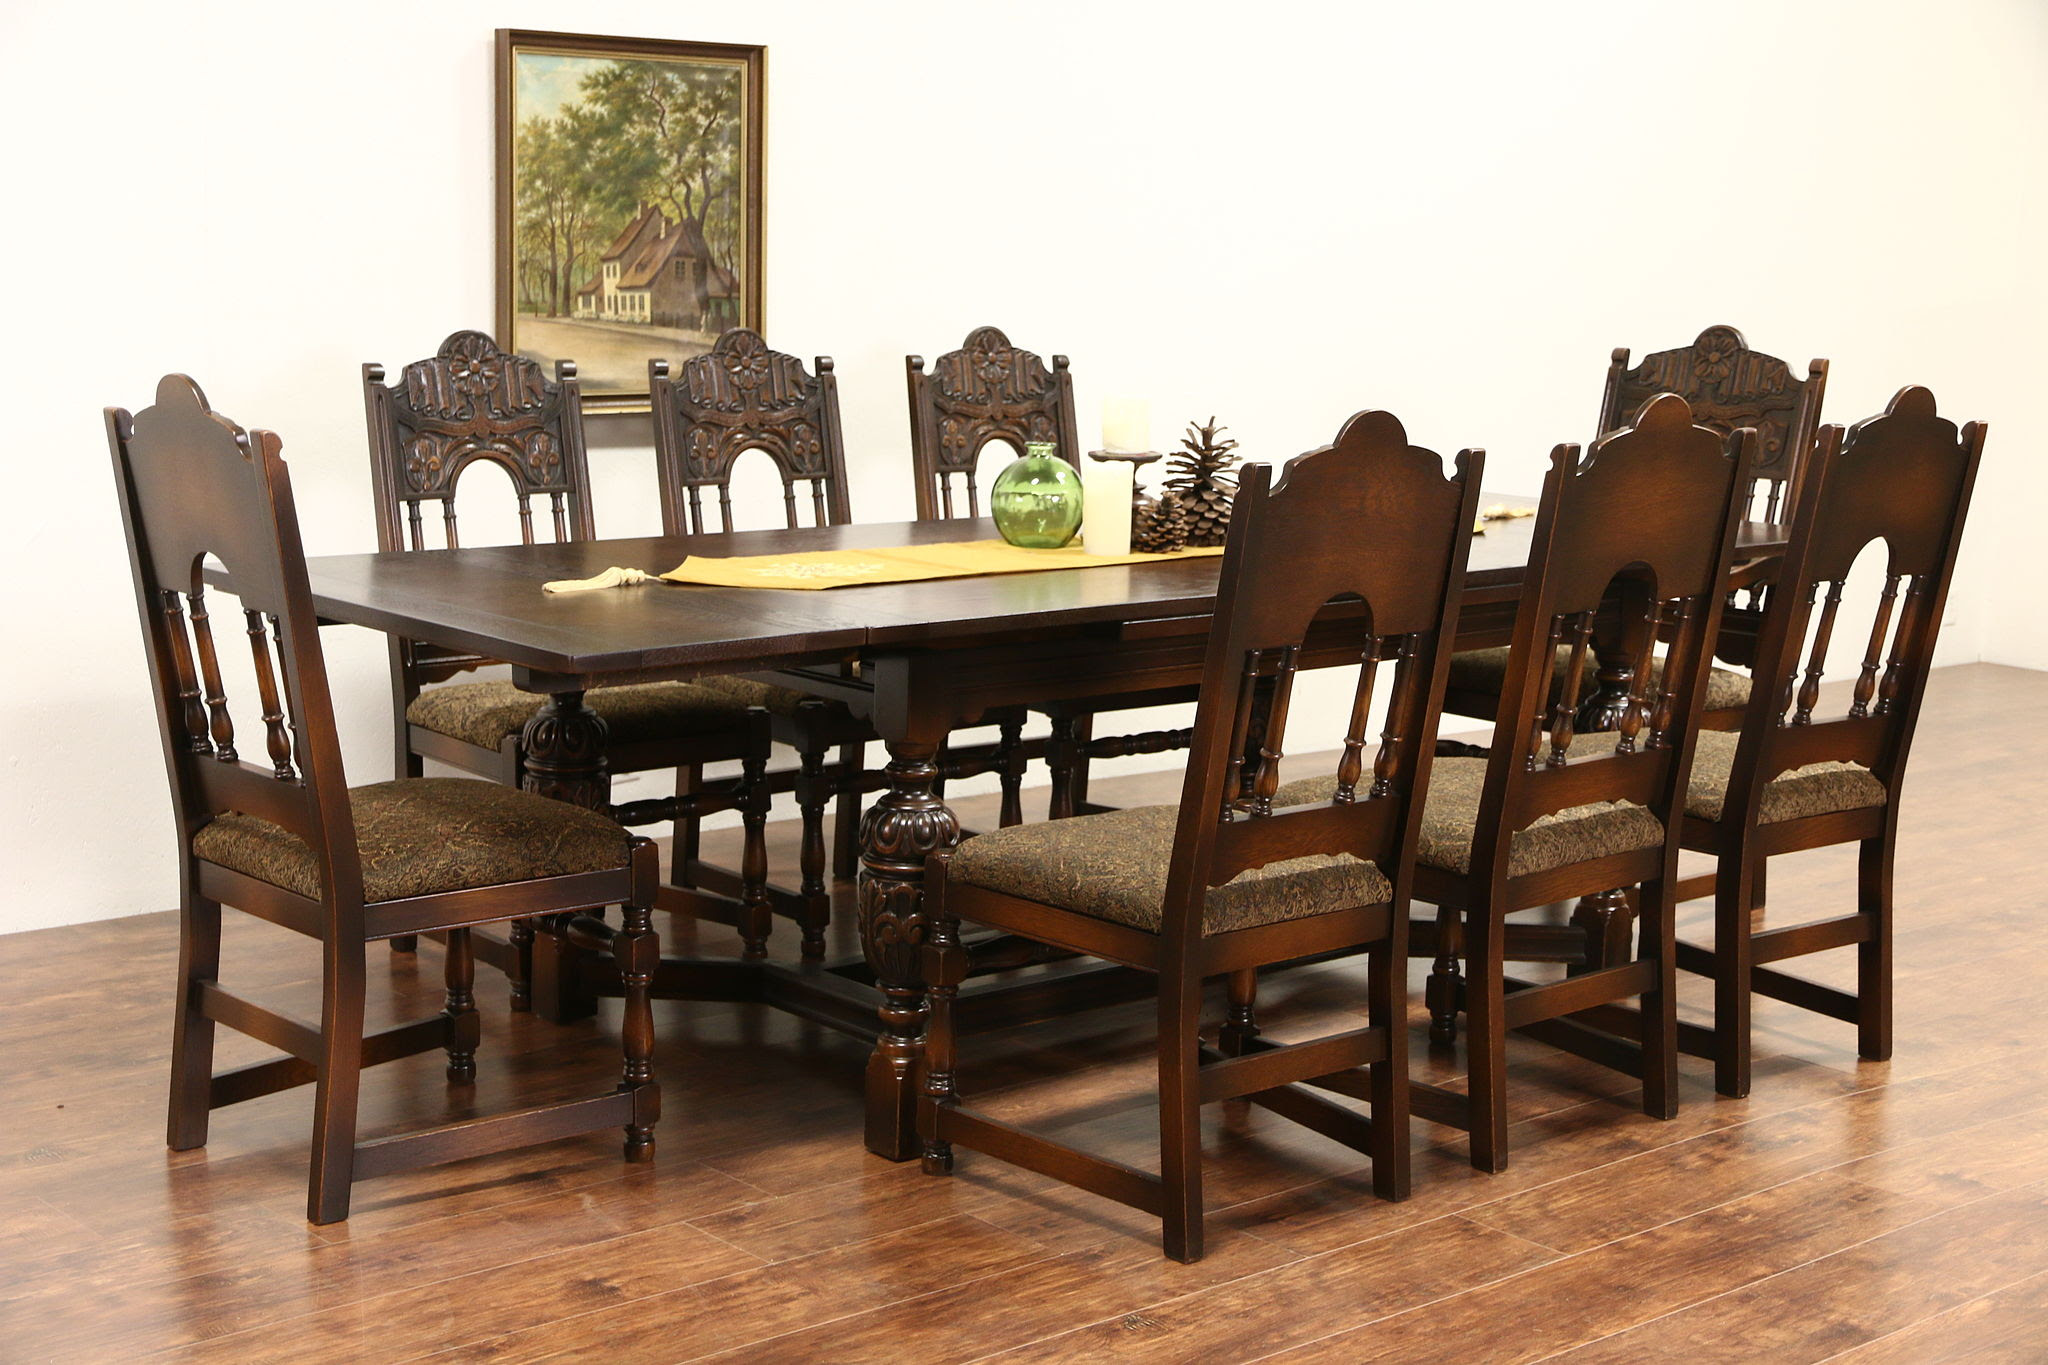 Dual purpose furniture demonstration of the expand table & nano chair set. Sold English Tudor Carved Oak 1925 Antique Dining Set Table 8 Chairs Harp Gallery Antiques Furniture